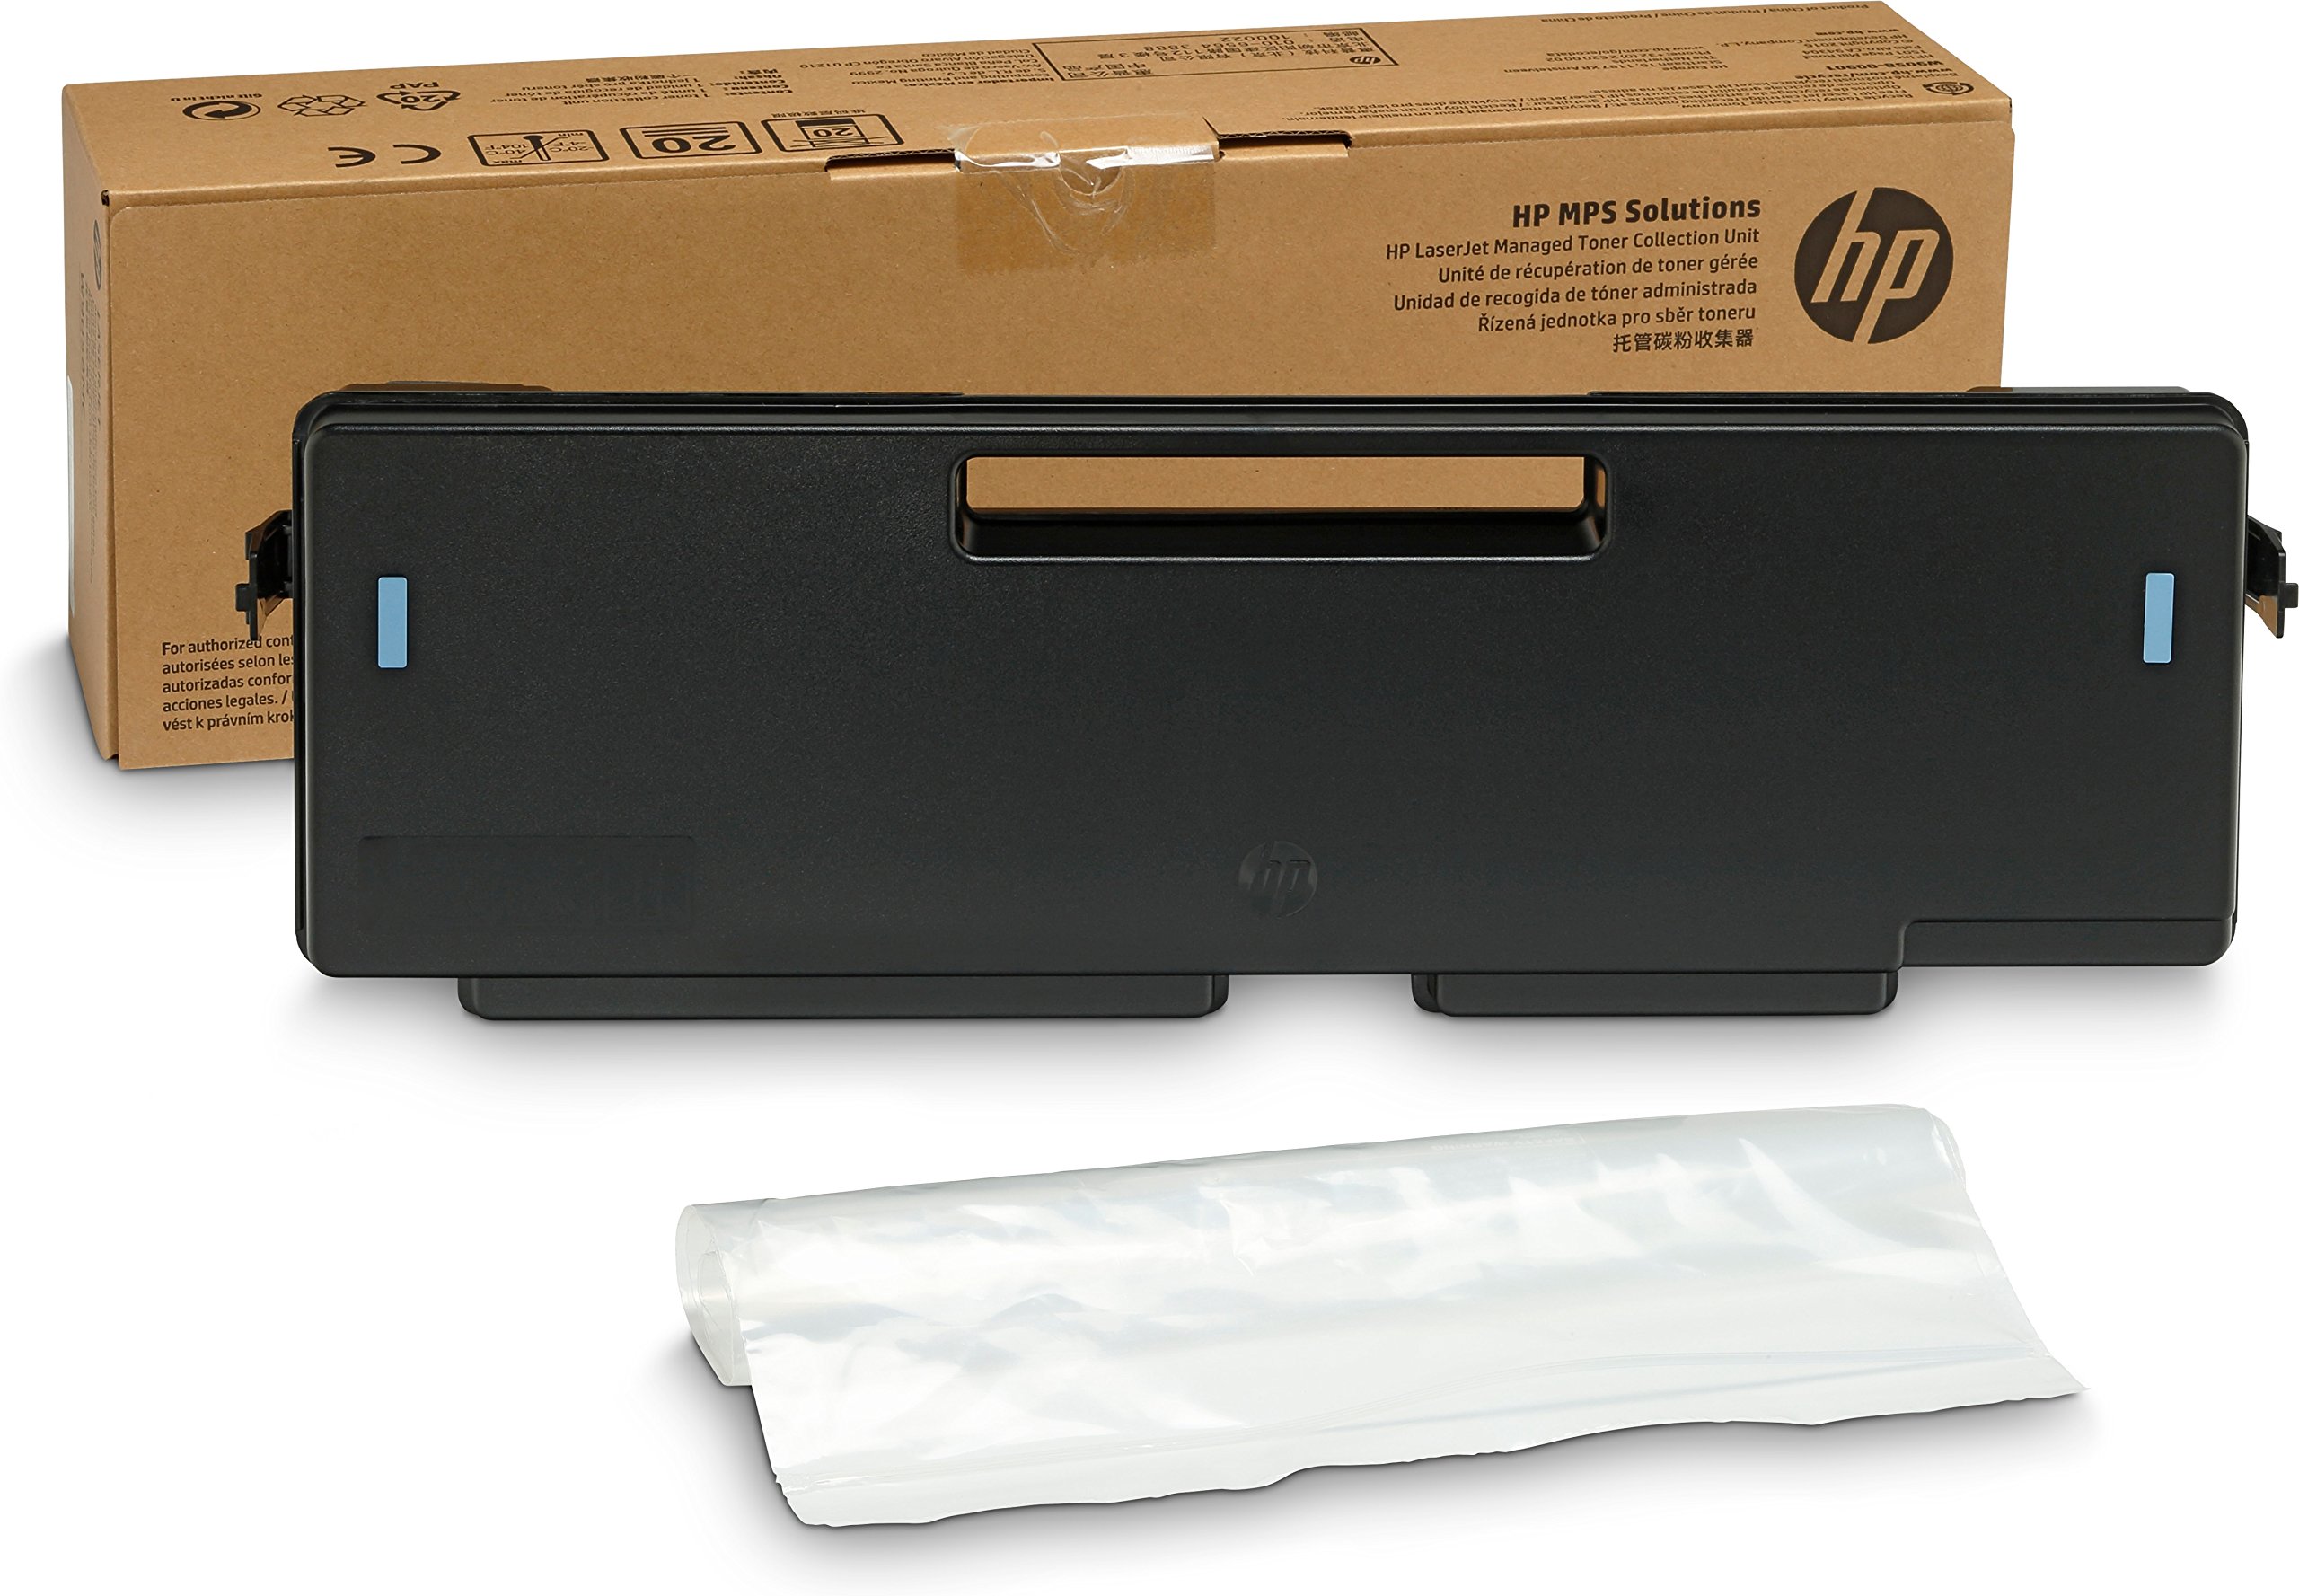 HP MANAGED LJ WASTE CONTAINER